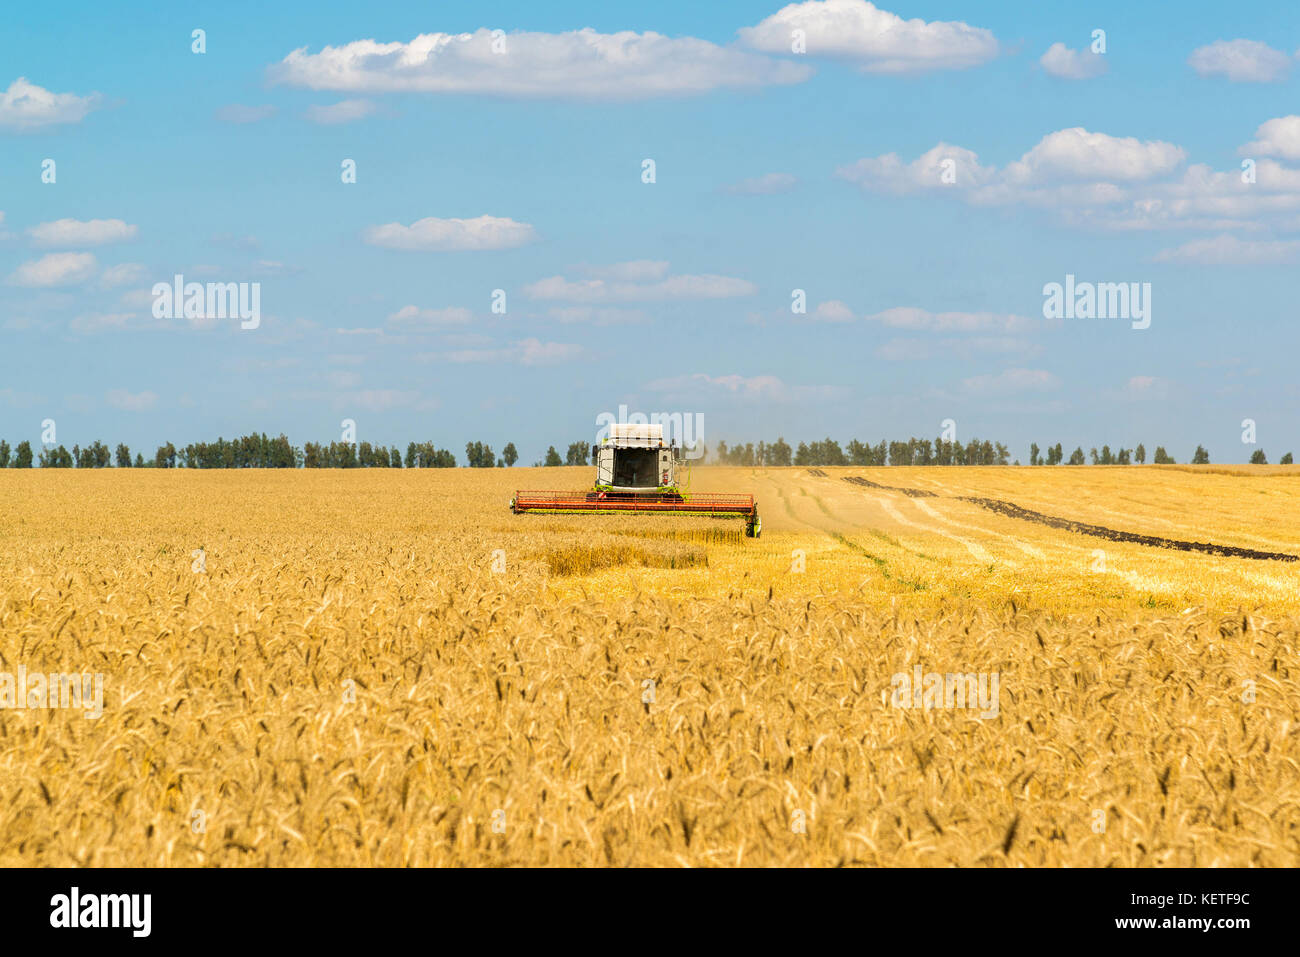 The combine works on Big Field of Ripe Wheat. Russia Stock Photo